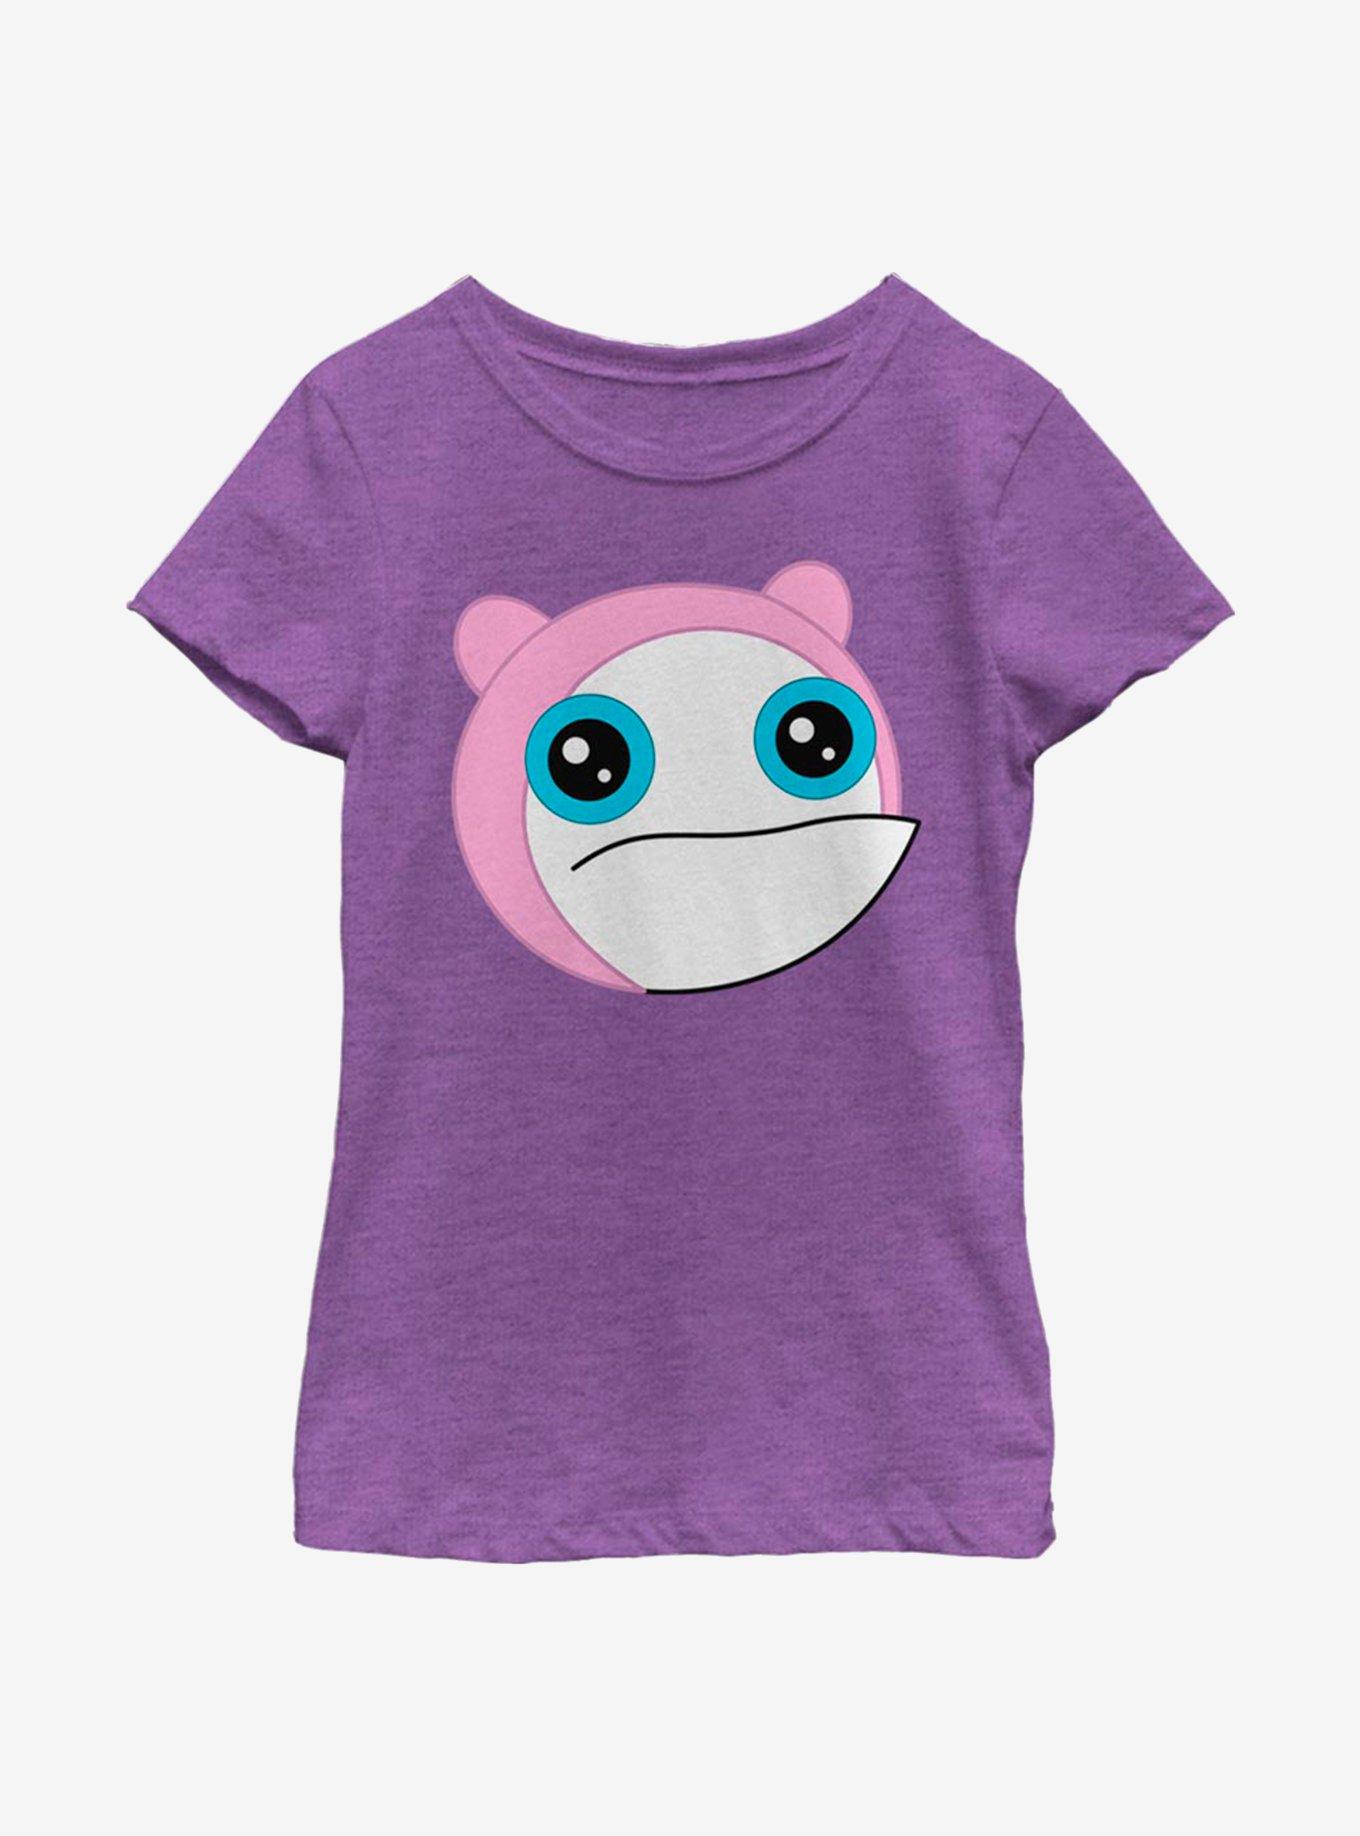 Disney Phineas And Ferb Large Meap Youth Girls T-Shirt, PURPLE BERRY, hi-res